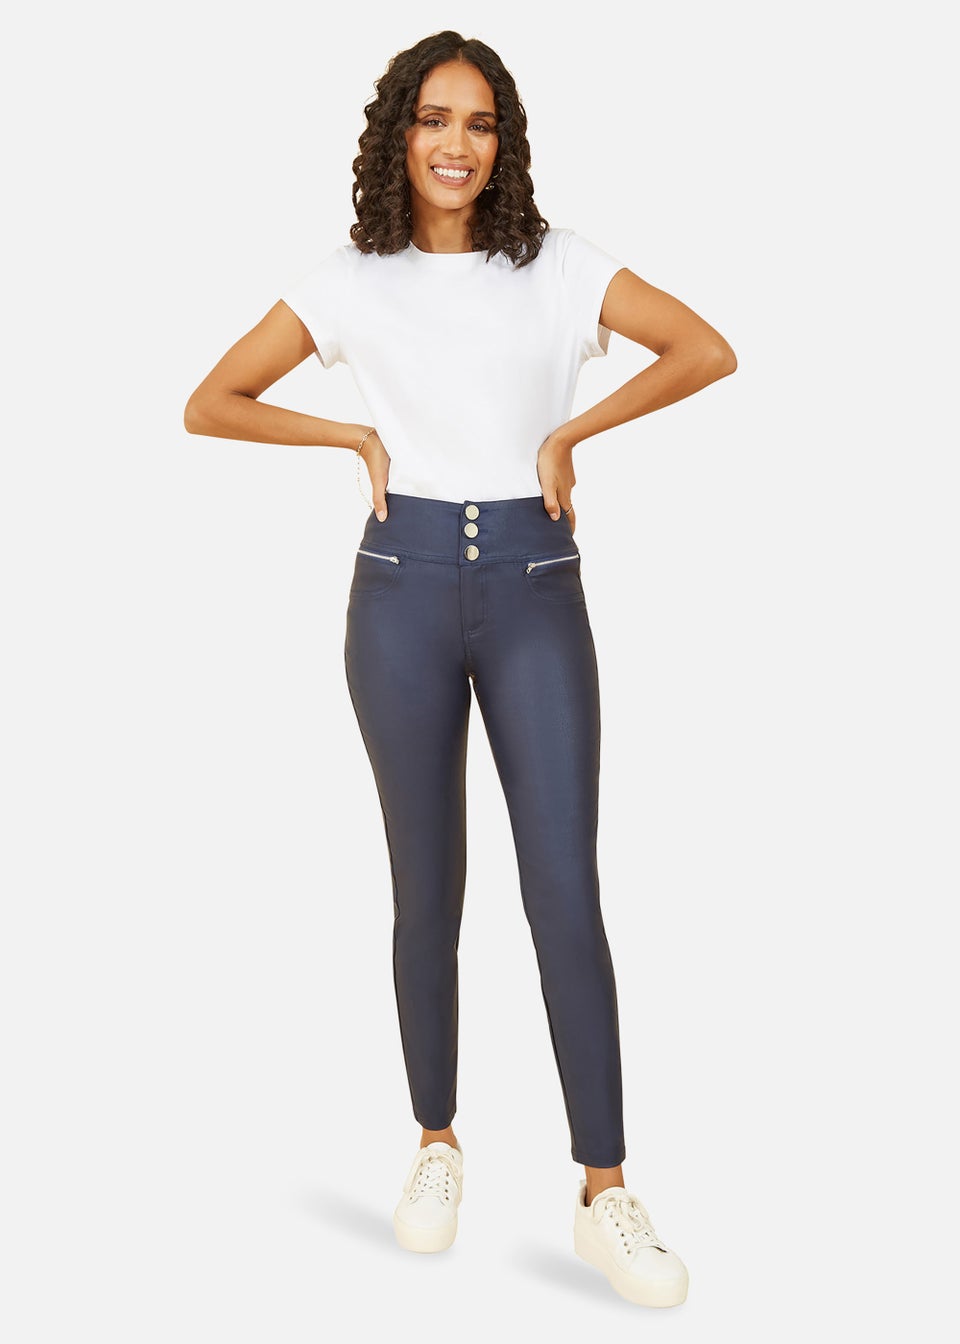 Yumi Wet Look Jegging With Zips in Navy